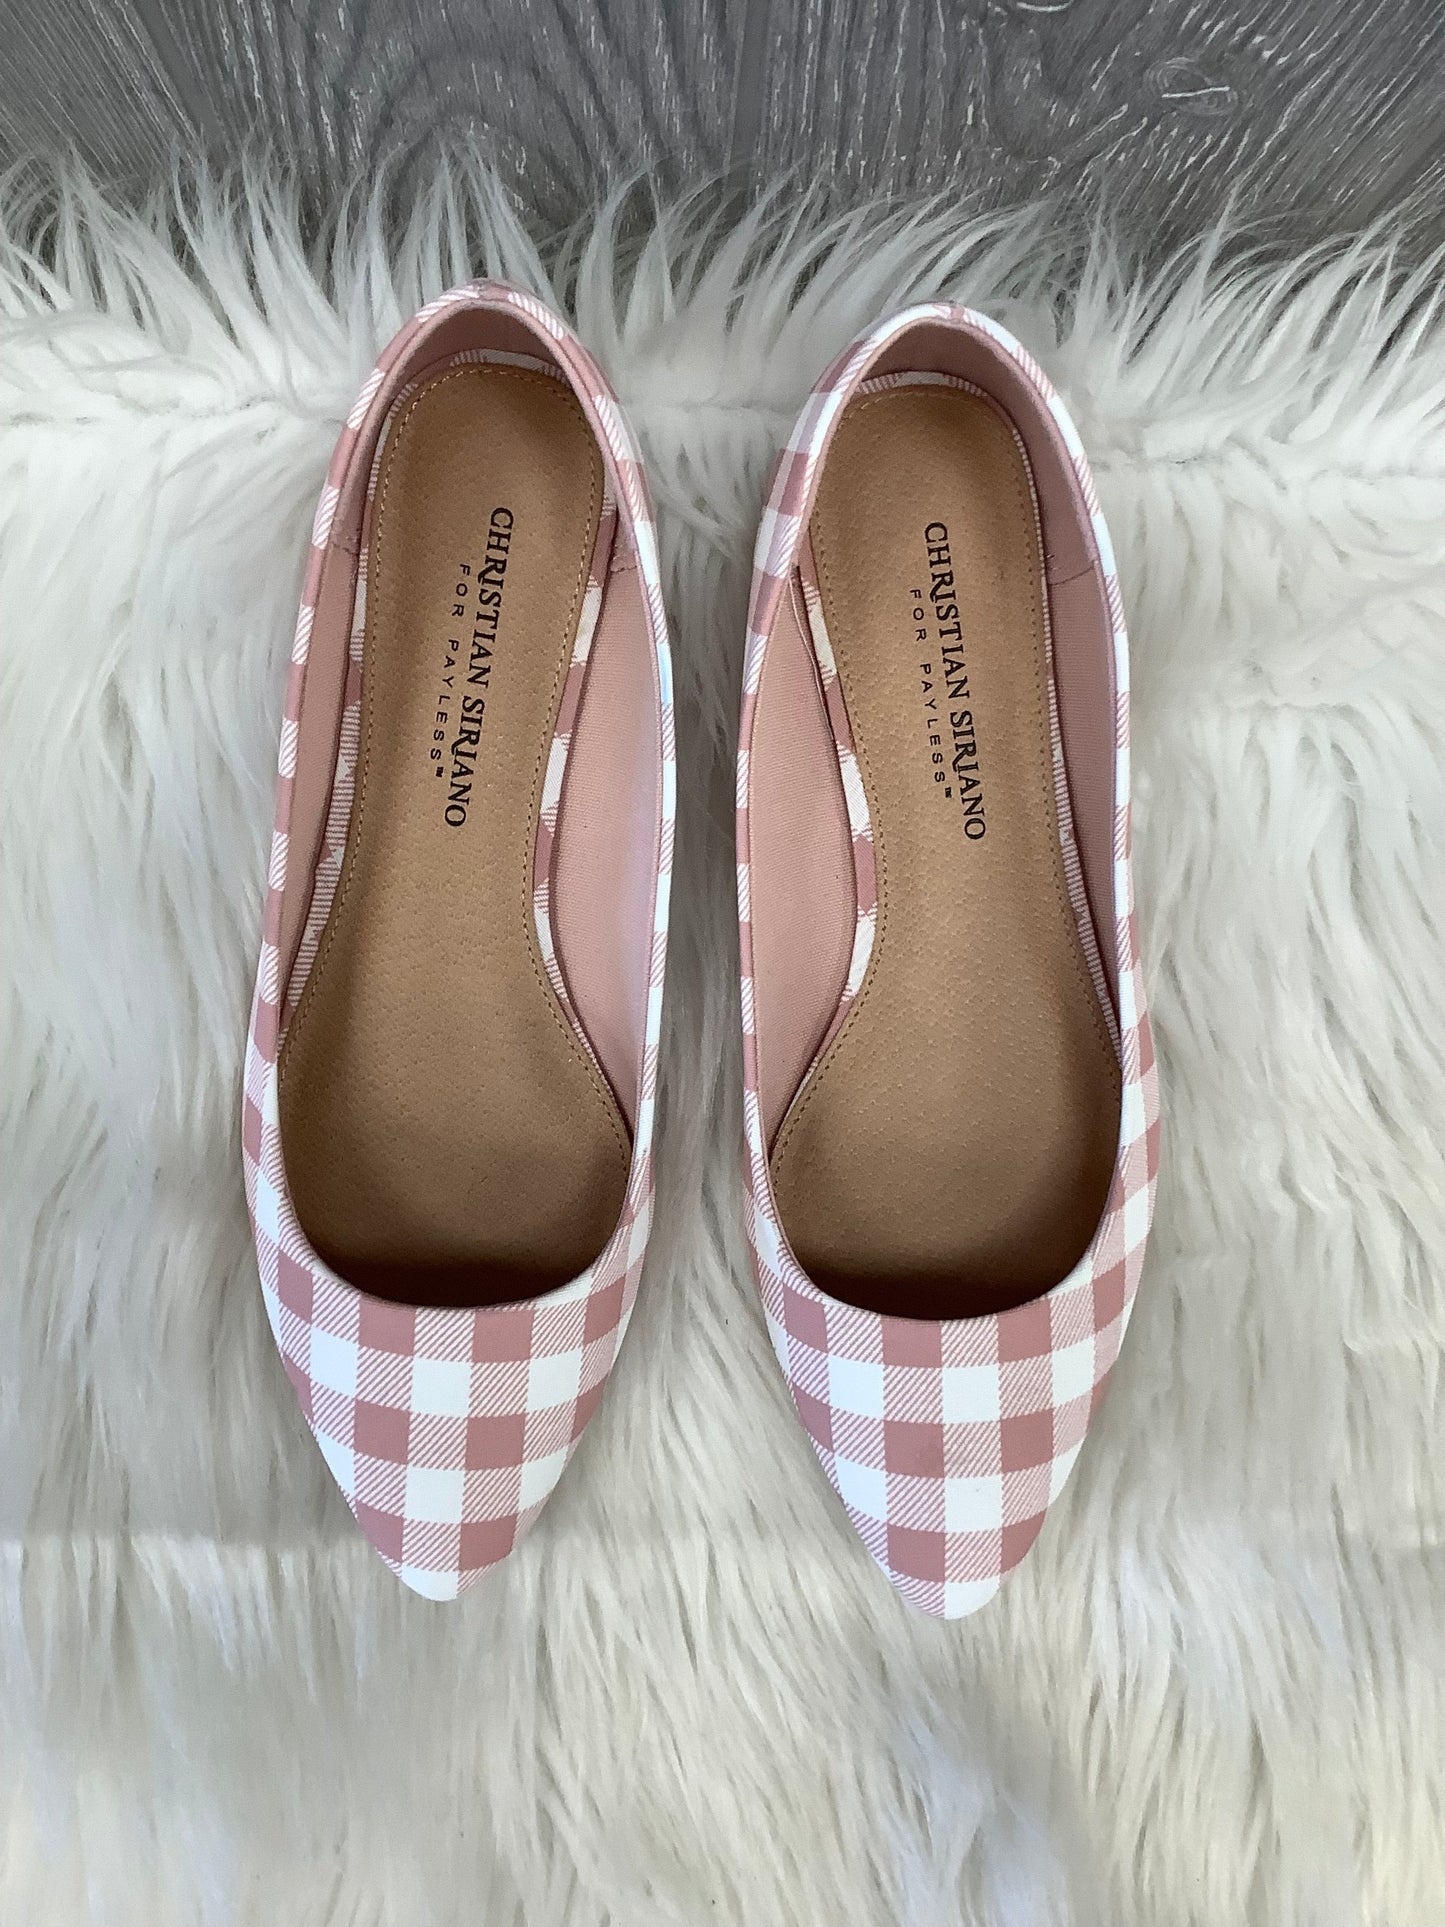 Pink & White Shoes Flats Christian Siriano For Payless, Size 7